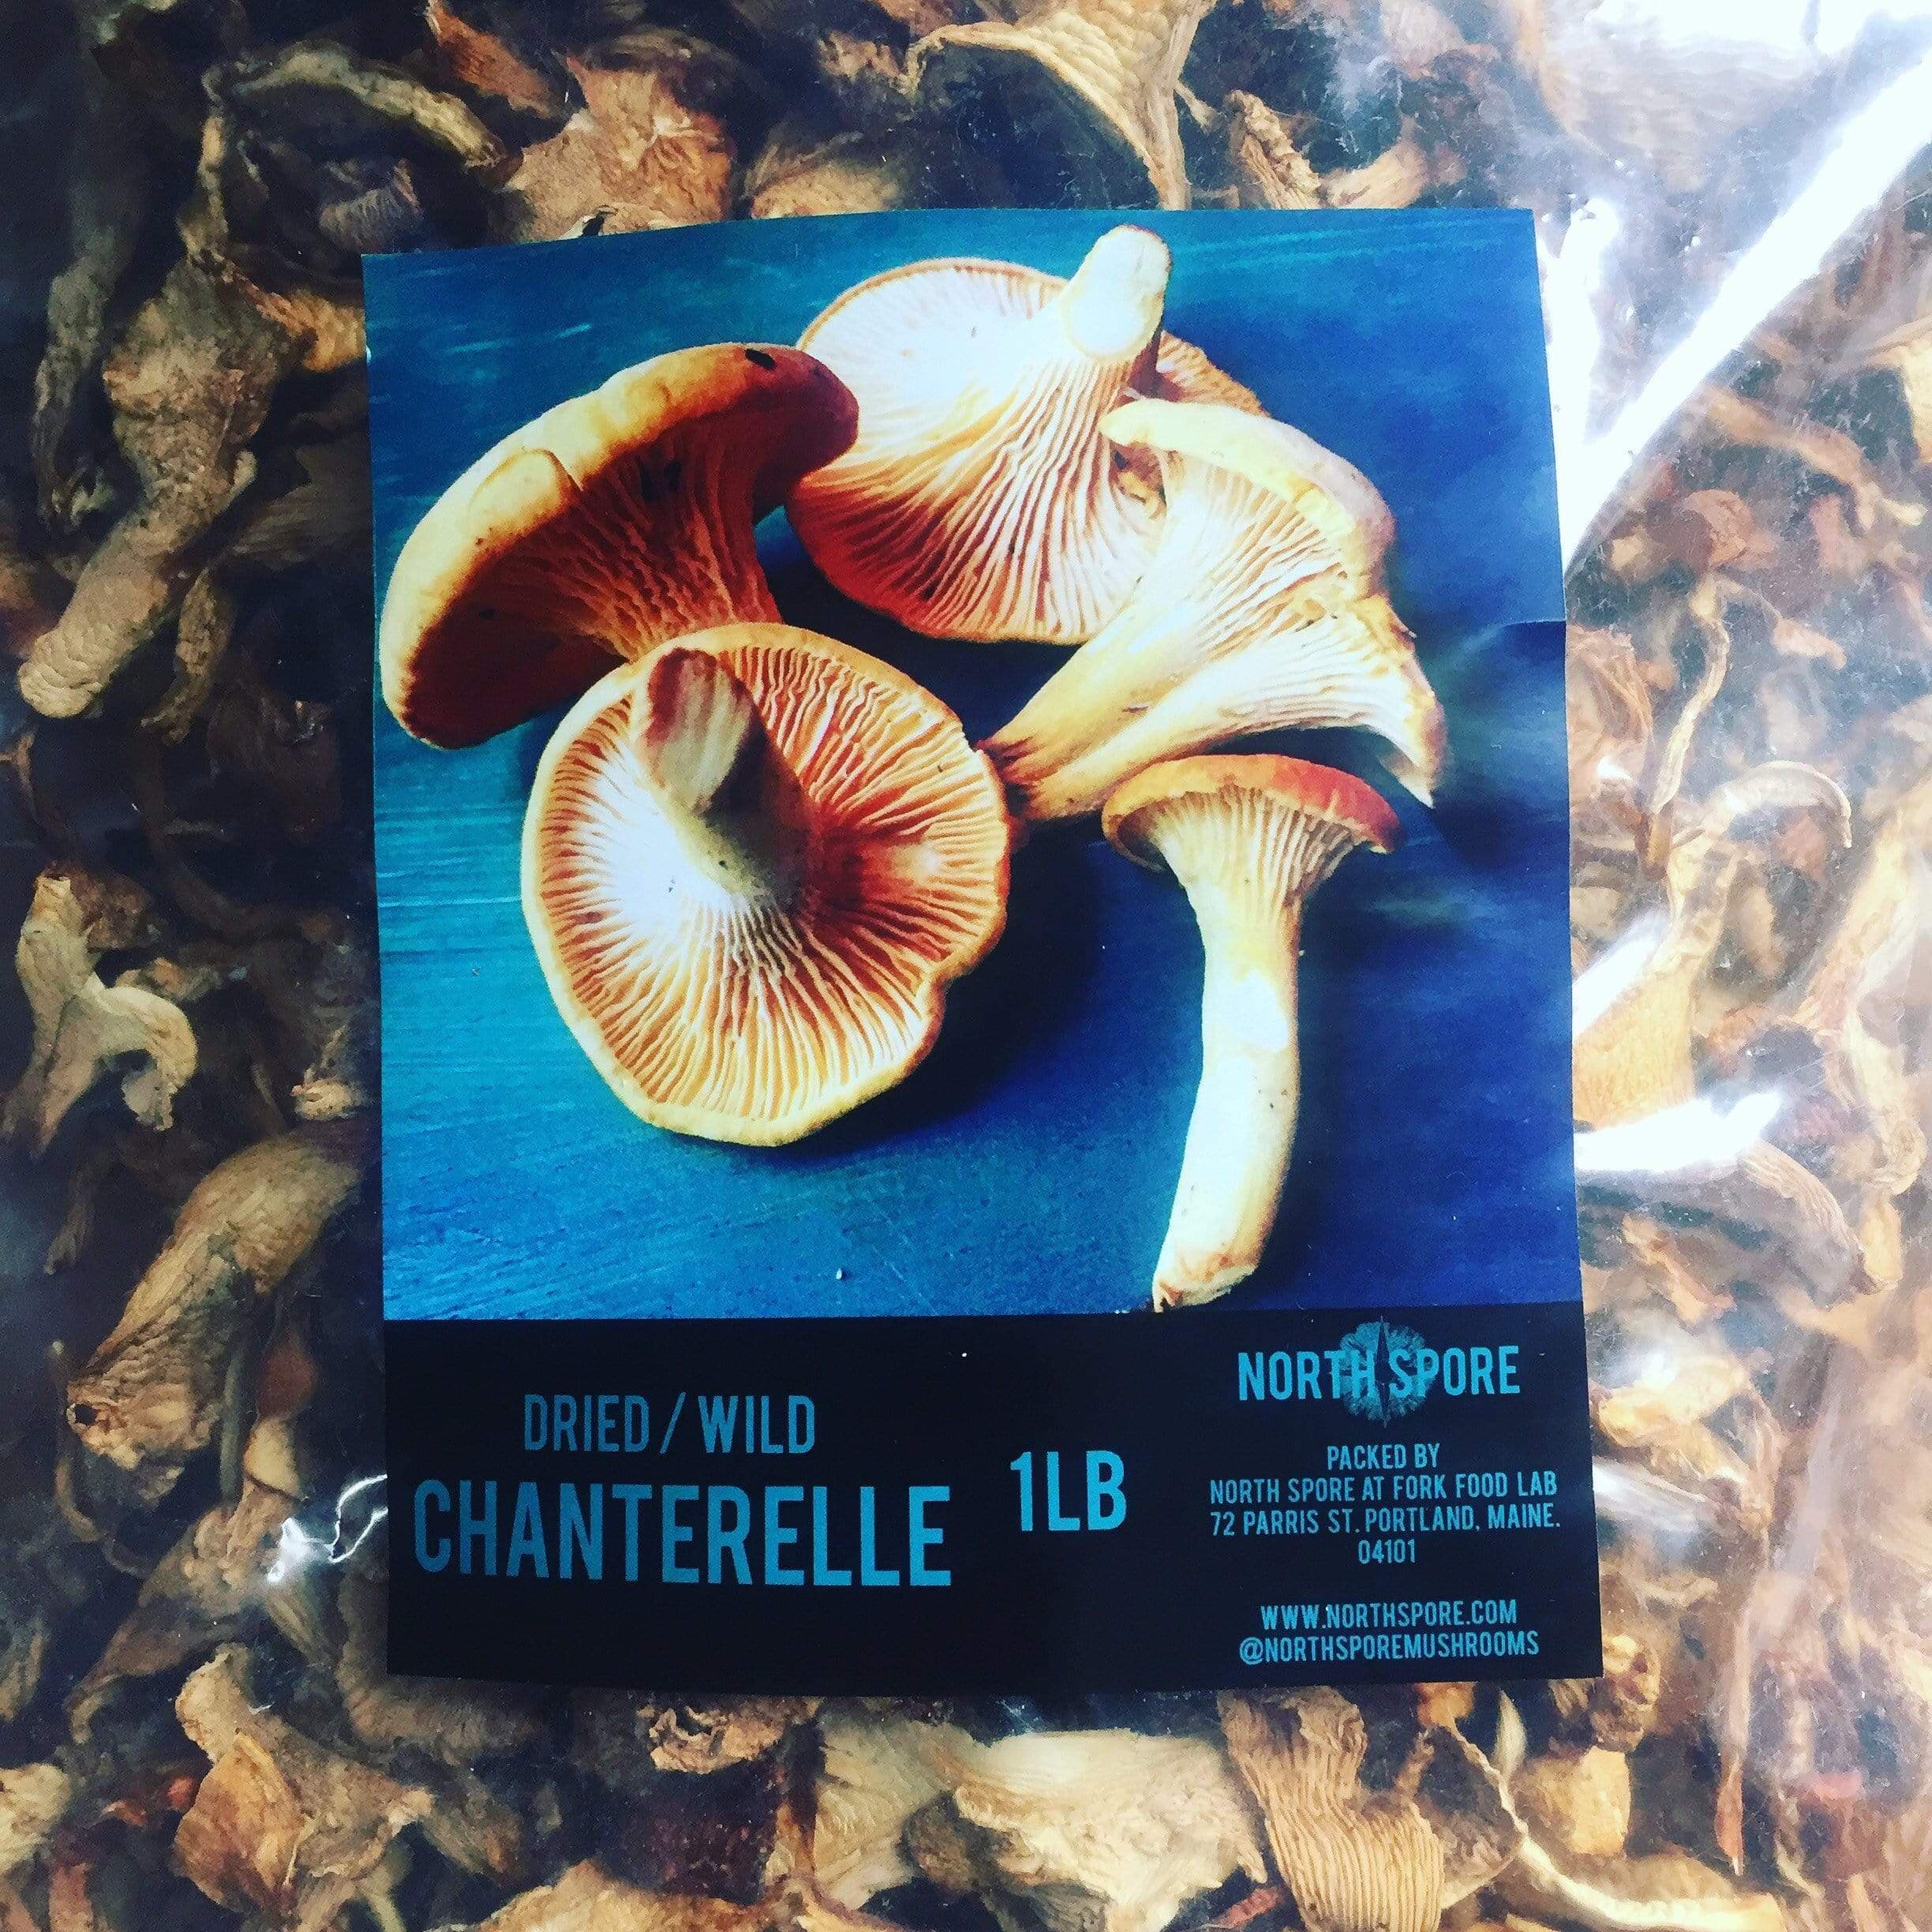 Dried Wild Chanterelle Mushrooms by North Spore